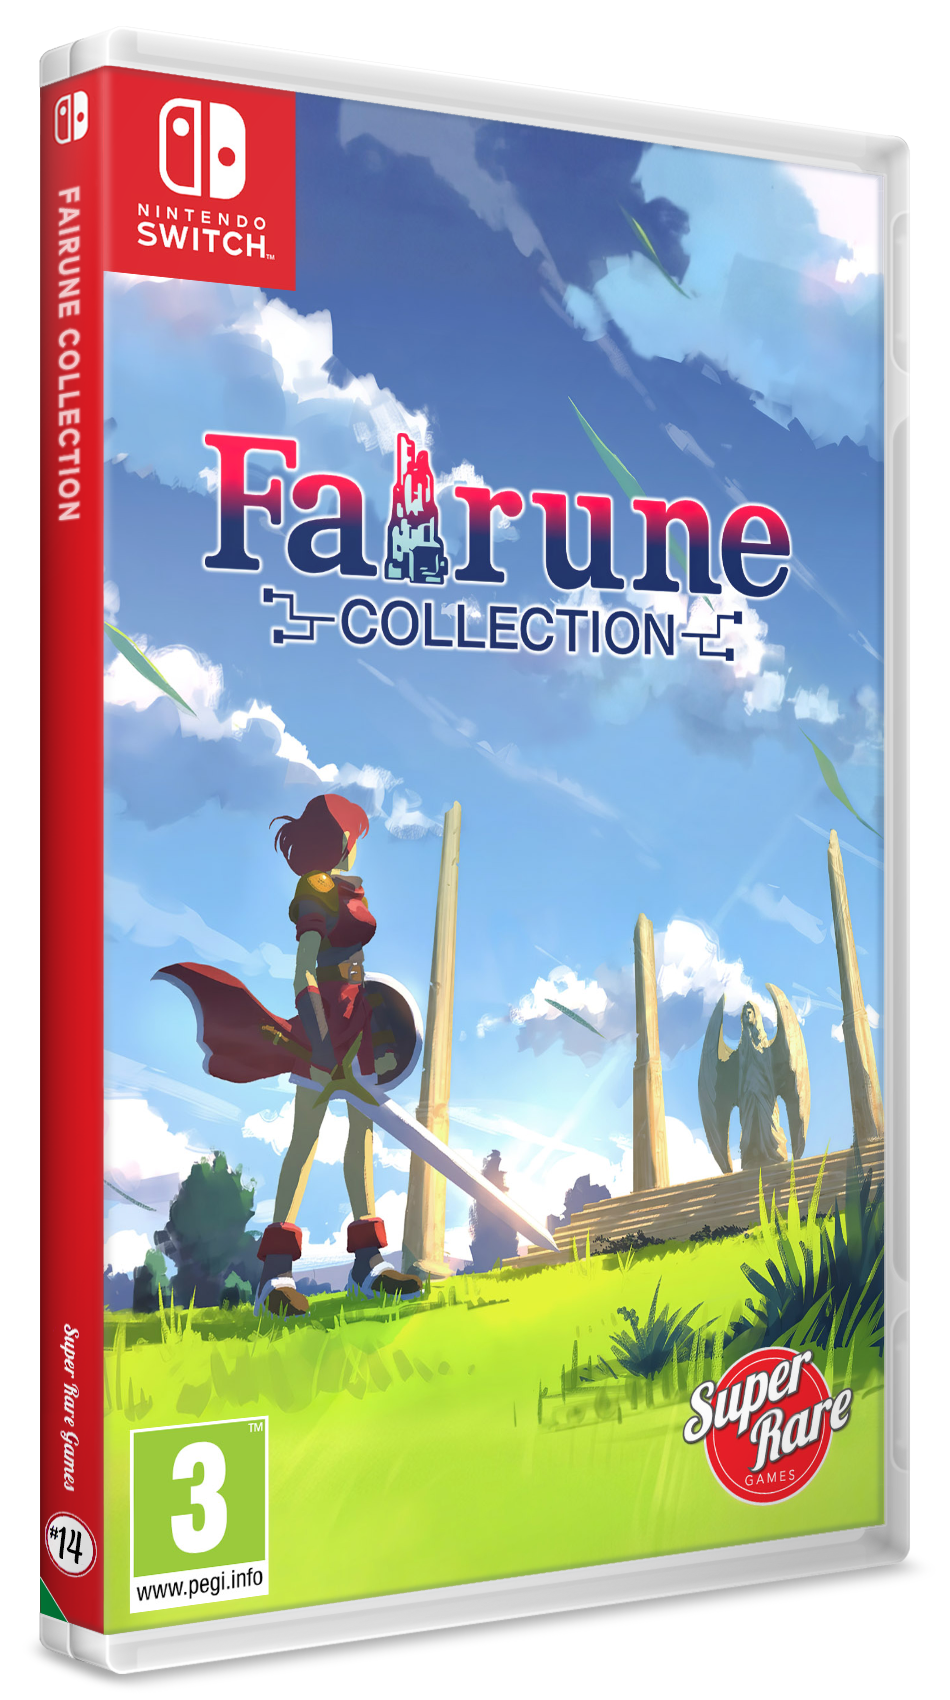 fairune-collection-images-launchbox-games-database